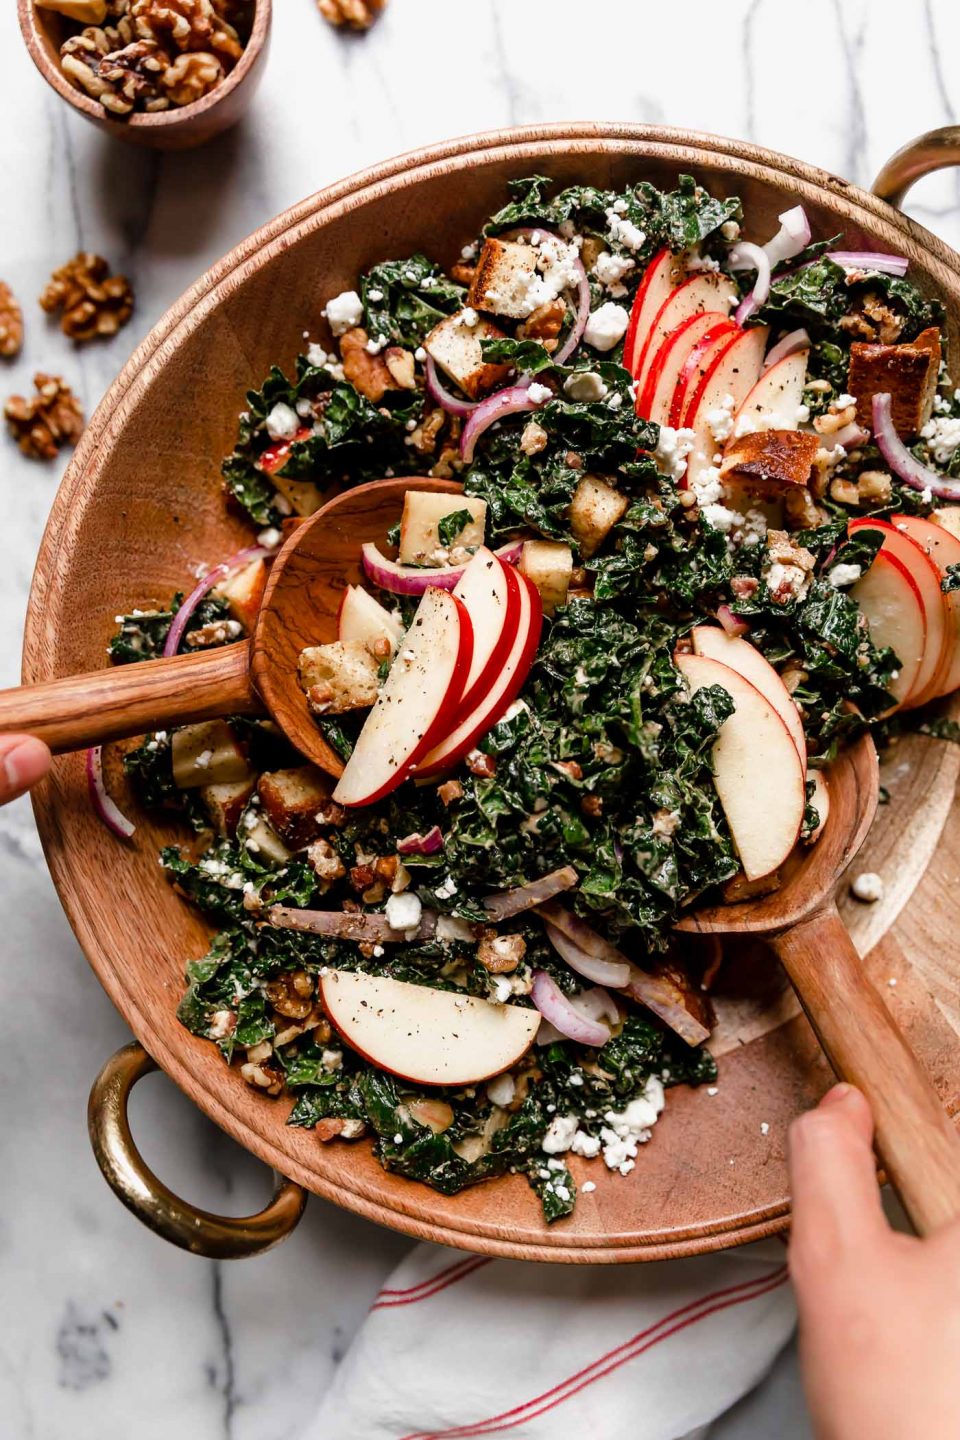 Autumn Kale salad in a large wooden serving bowl. A woman's hands are reaching into the frame with wooden spoons, tossing the salad. The salad is topped with clusters of sliced honeycrisp apples & croutons. The serving bowl is atop a white marble surface, next to honeycrisp apples & whole walnuts.